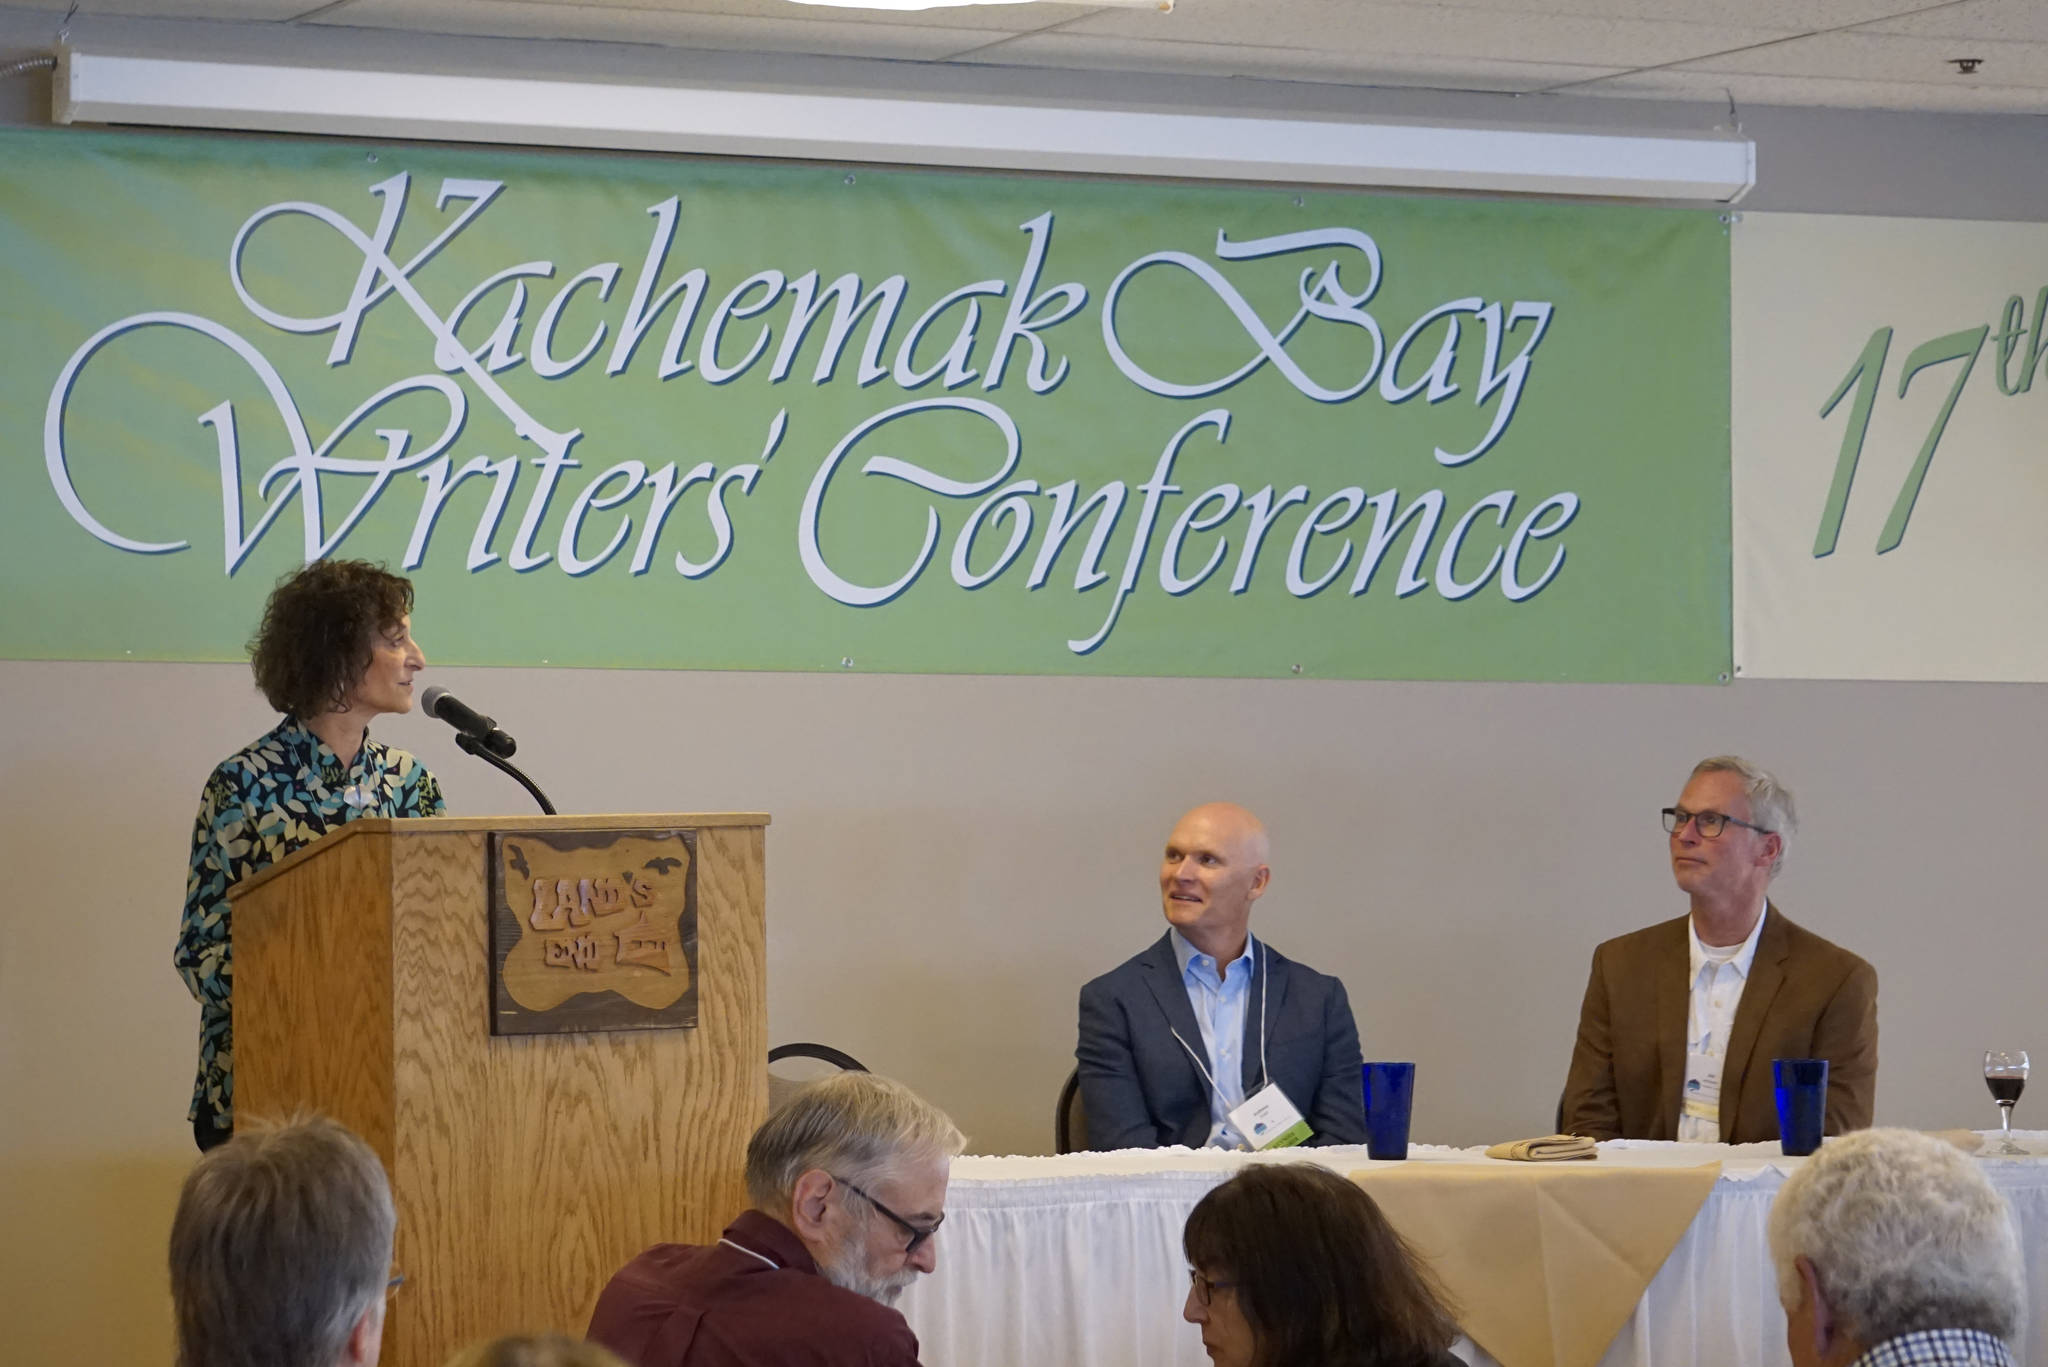 Kachemak Bay Campus Director Carol Swartz, left, speaks June 8, 2018, at the opening of the 2018 Kachemak Bay Writers’ Conference at Land’s End Resort in Homer, Alaska. (Photo by Michael Armstrong/Homer News)